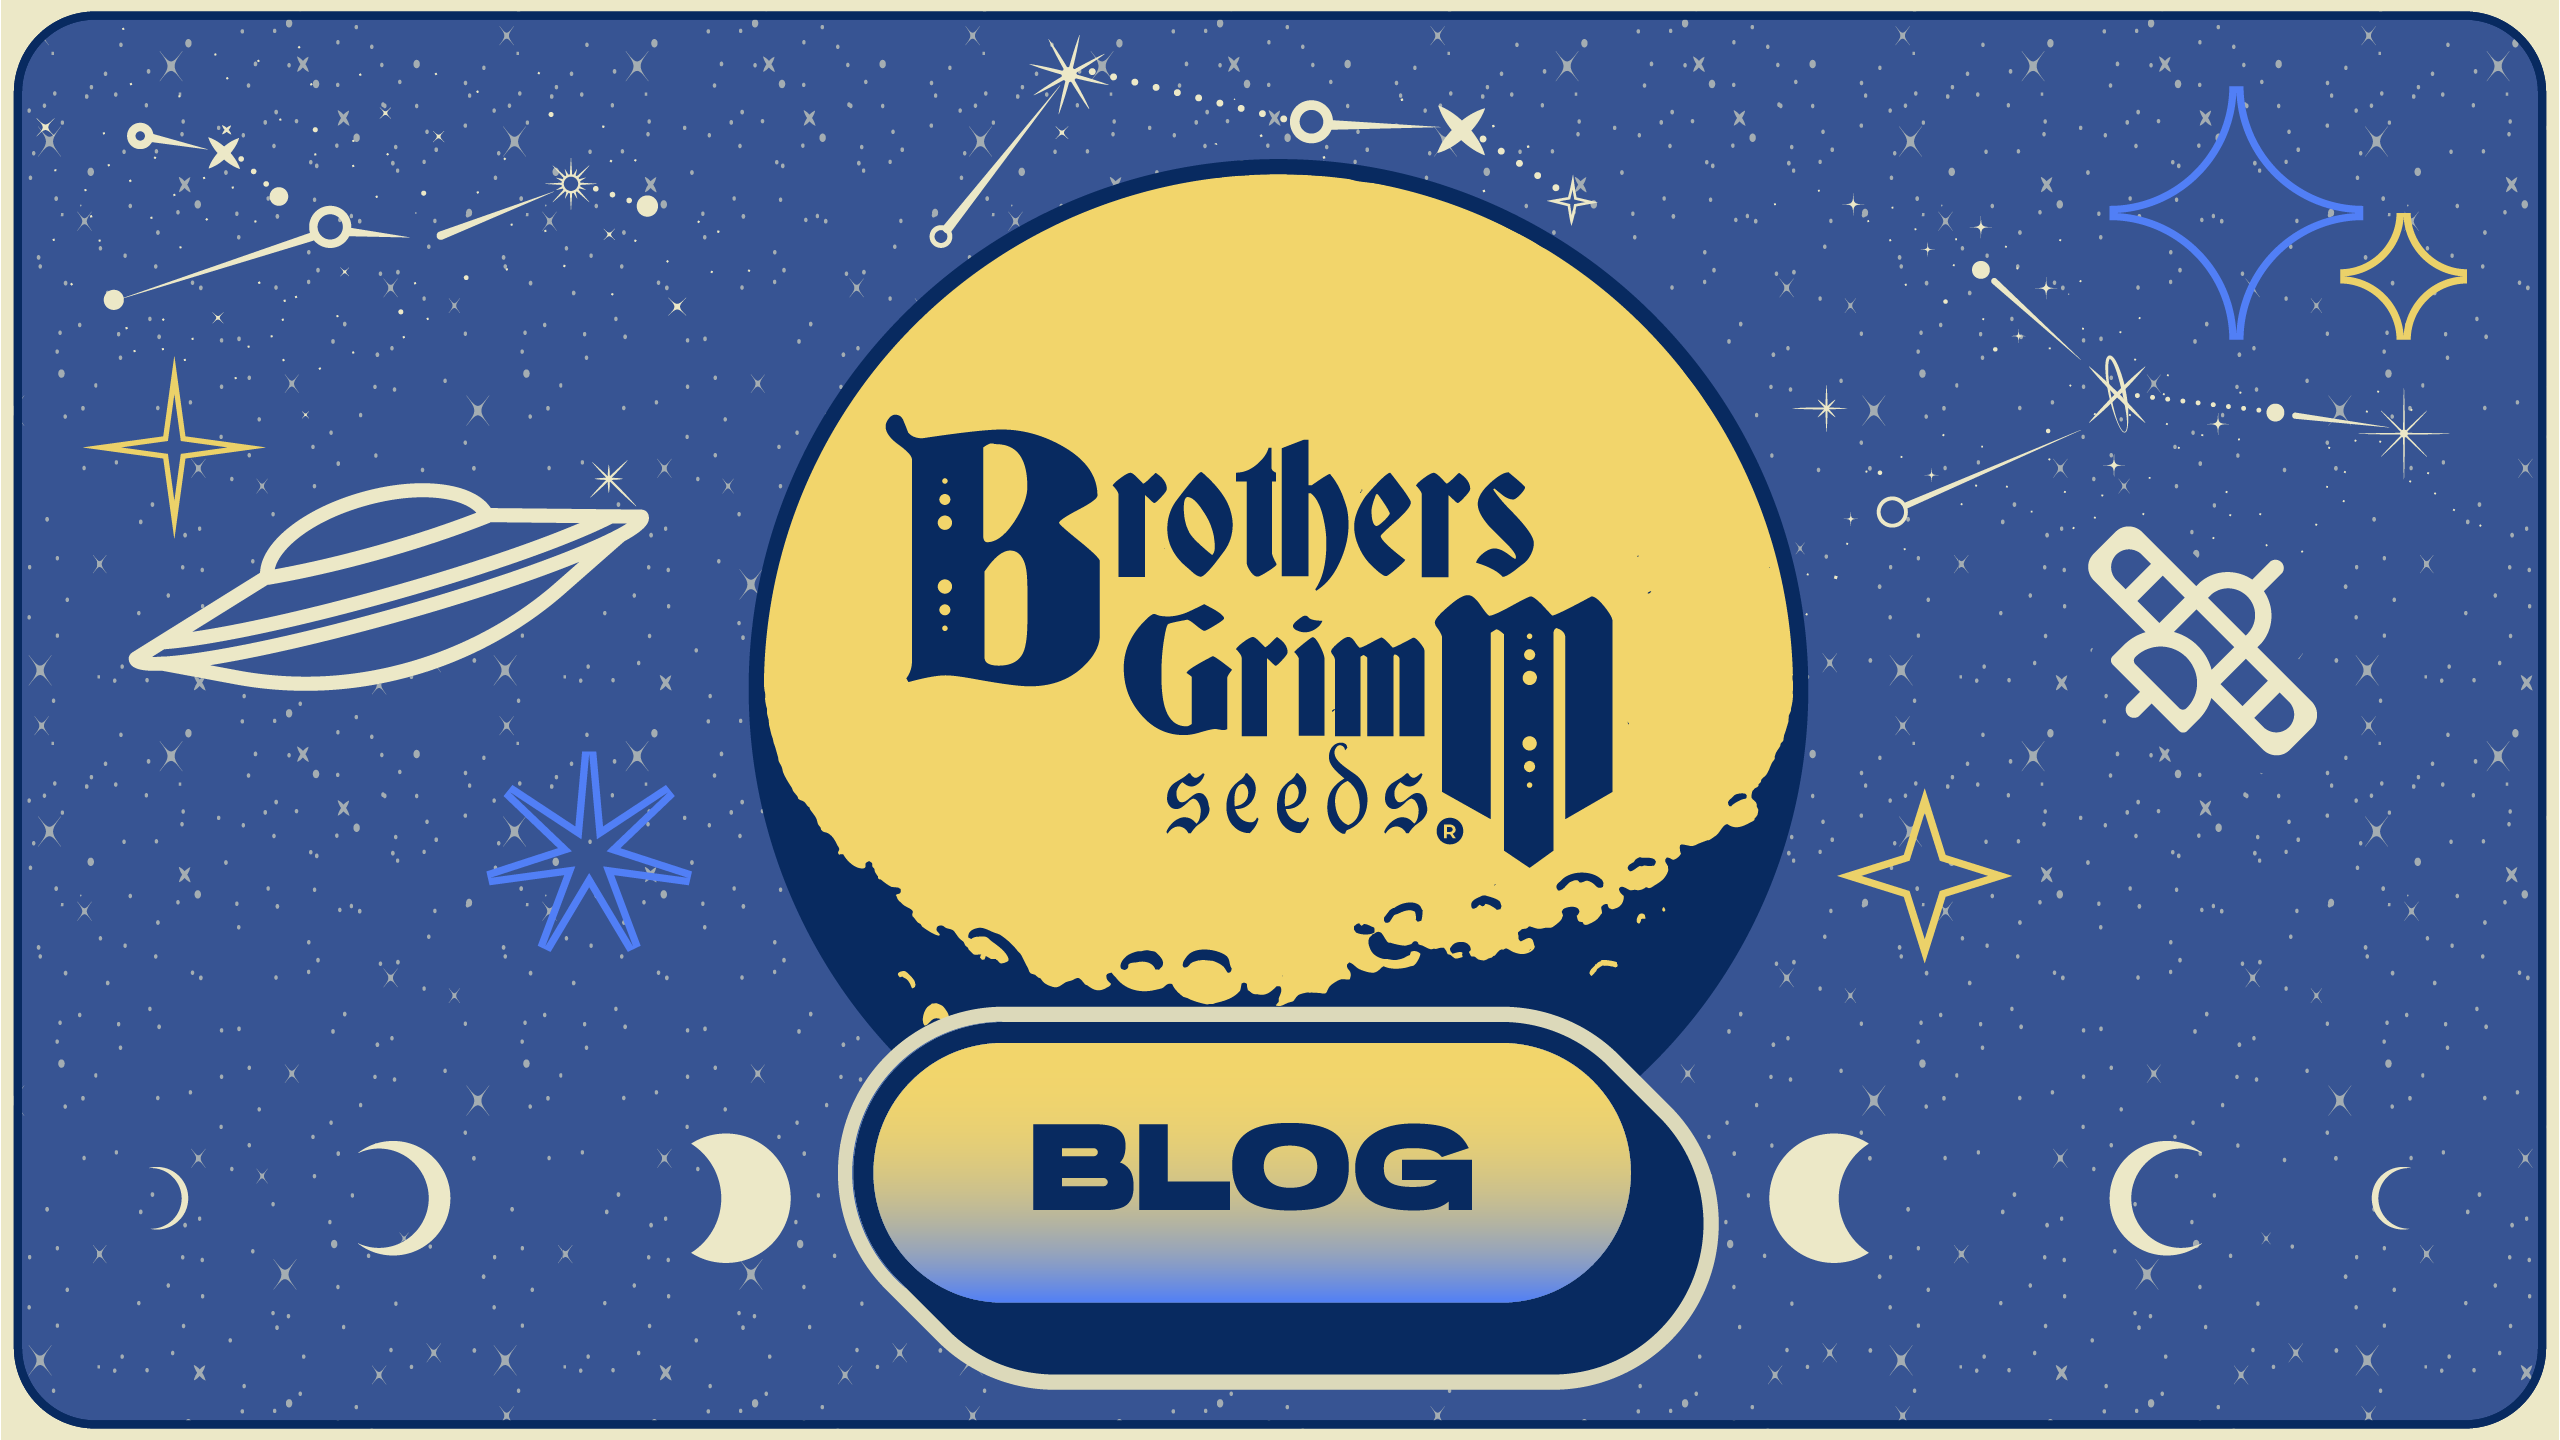 Brothers Grimm Seeds Seed Bank Blog